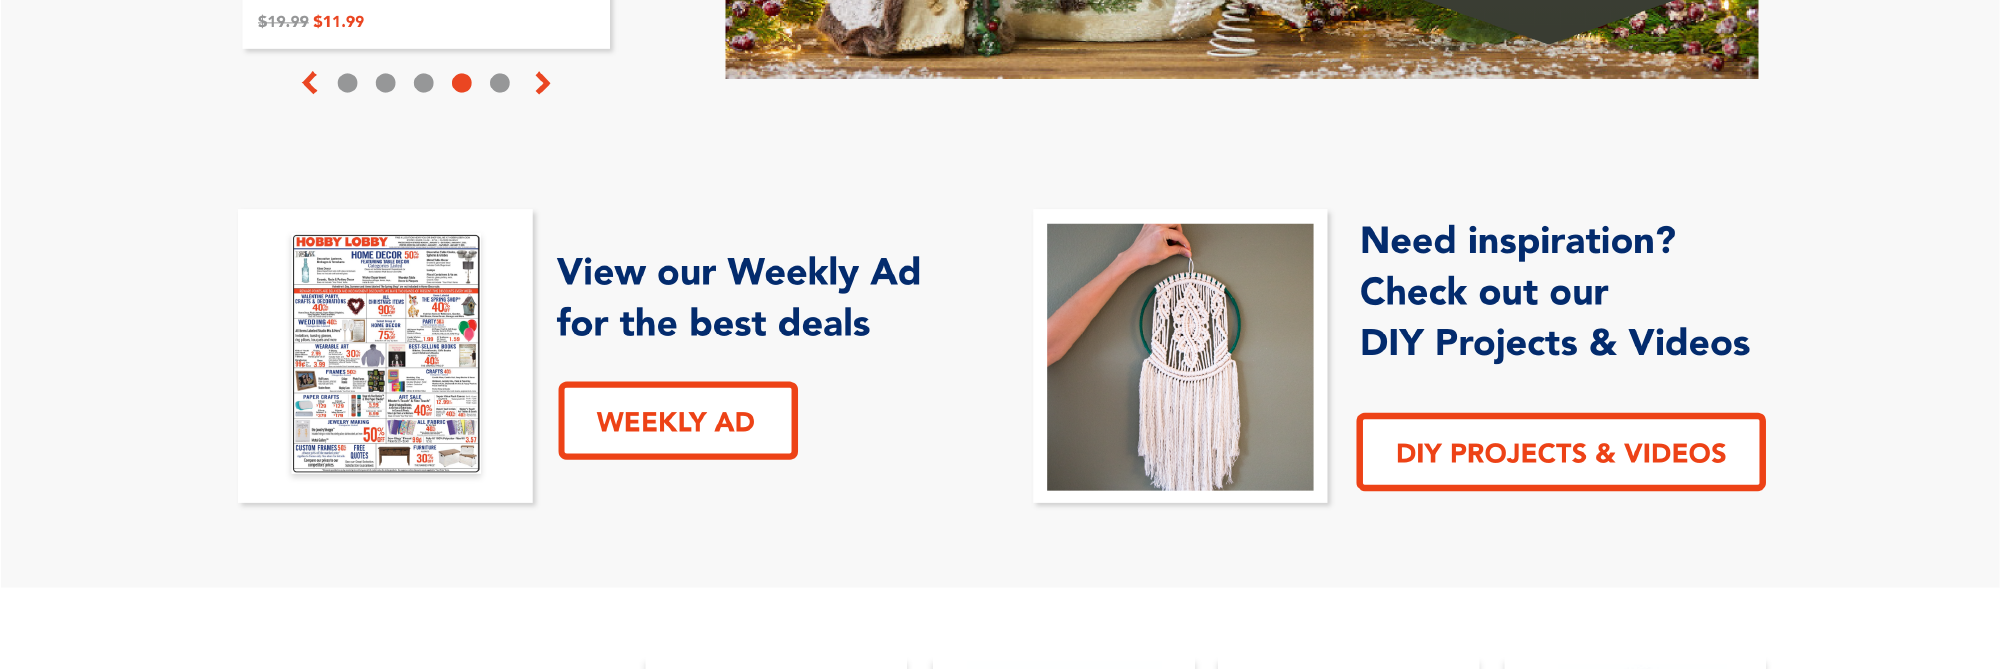 I included some highlights for the Weekly Ad and DIY Projects section in the main content.